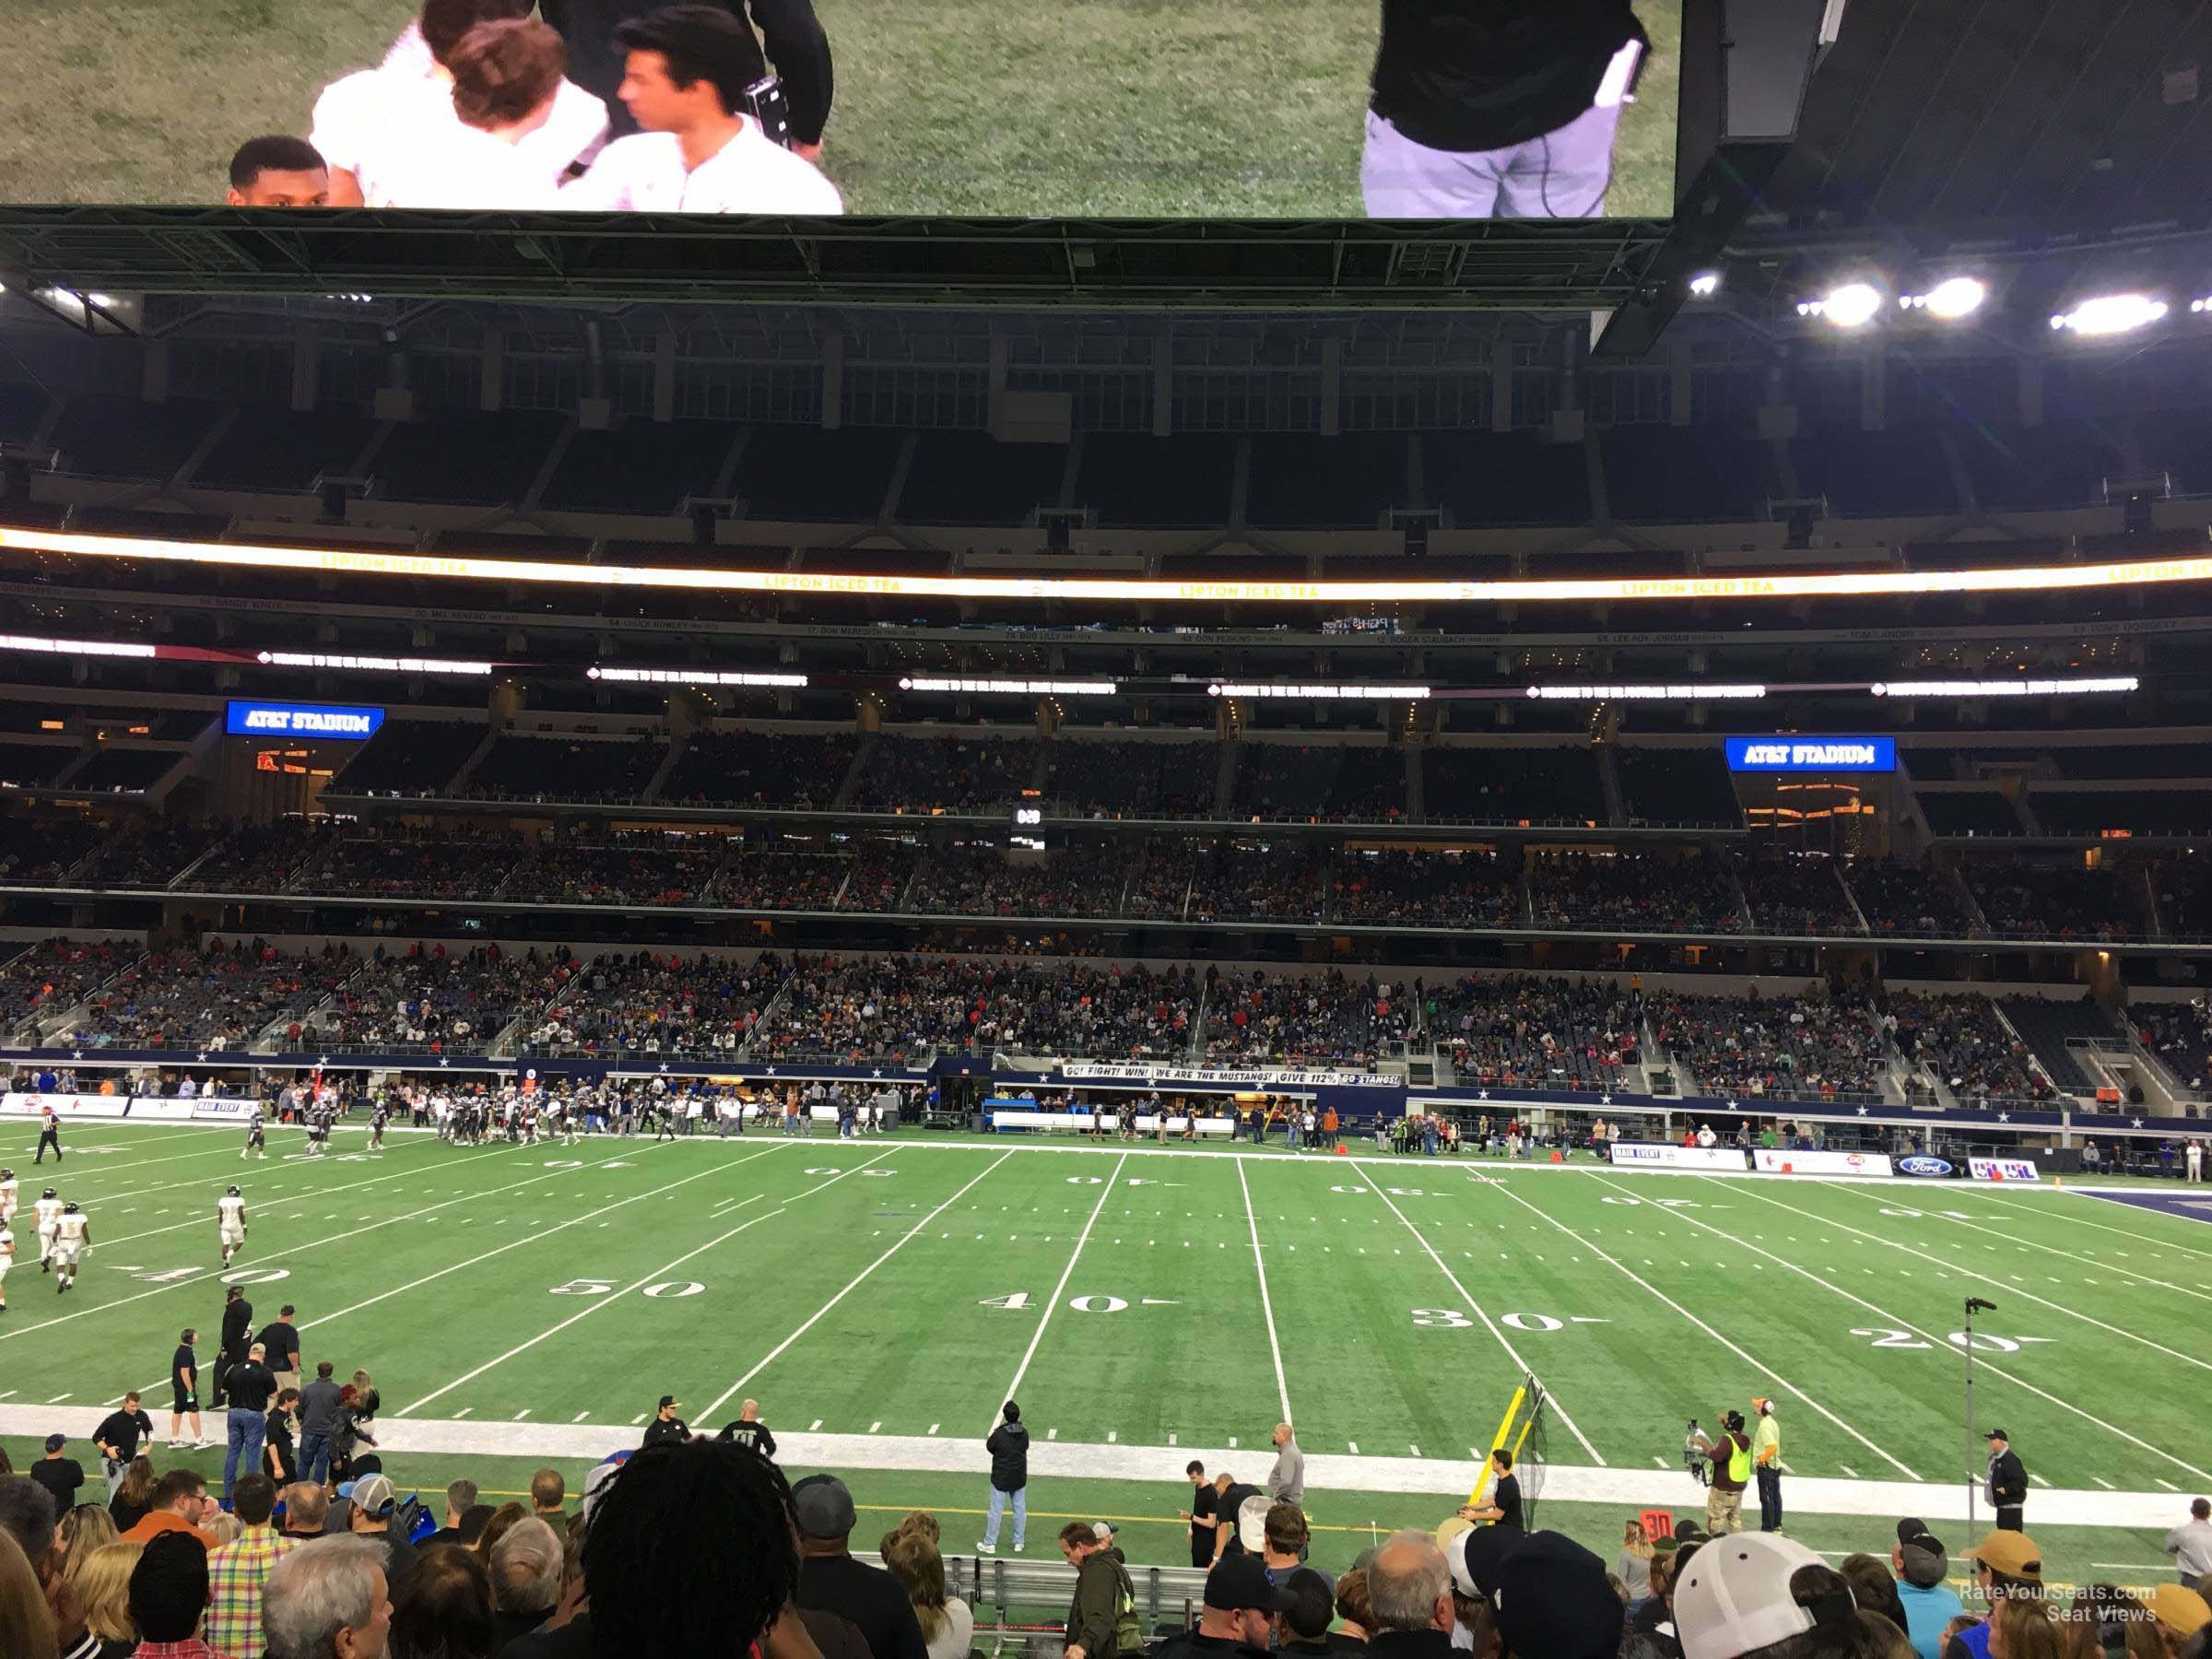 section c135, row 14 seat view  for football - at&t stadium (cowboys stadium)